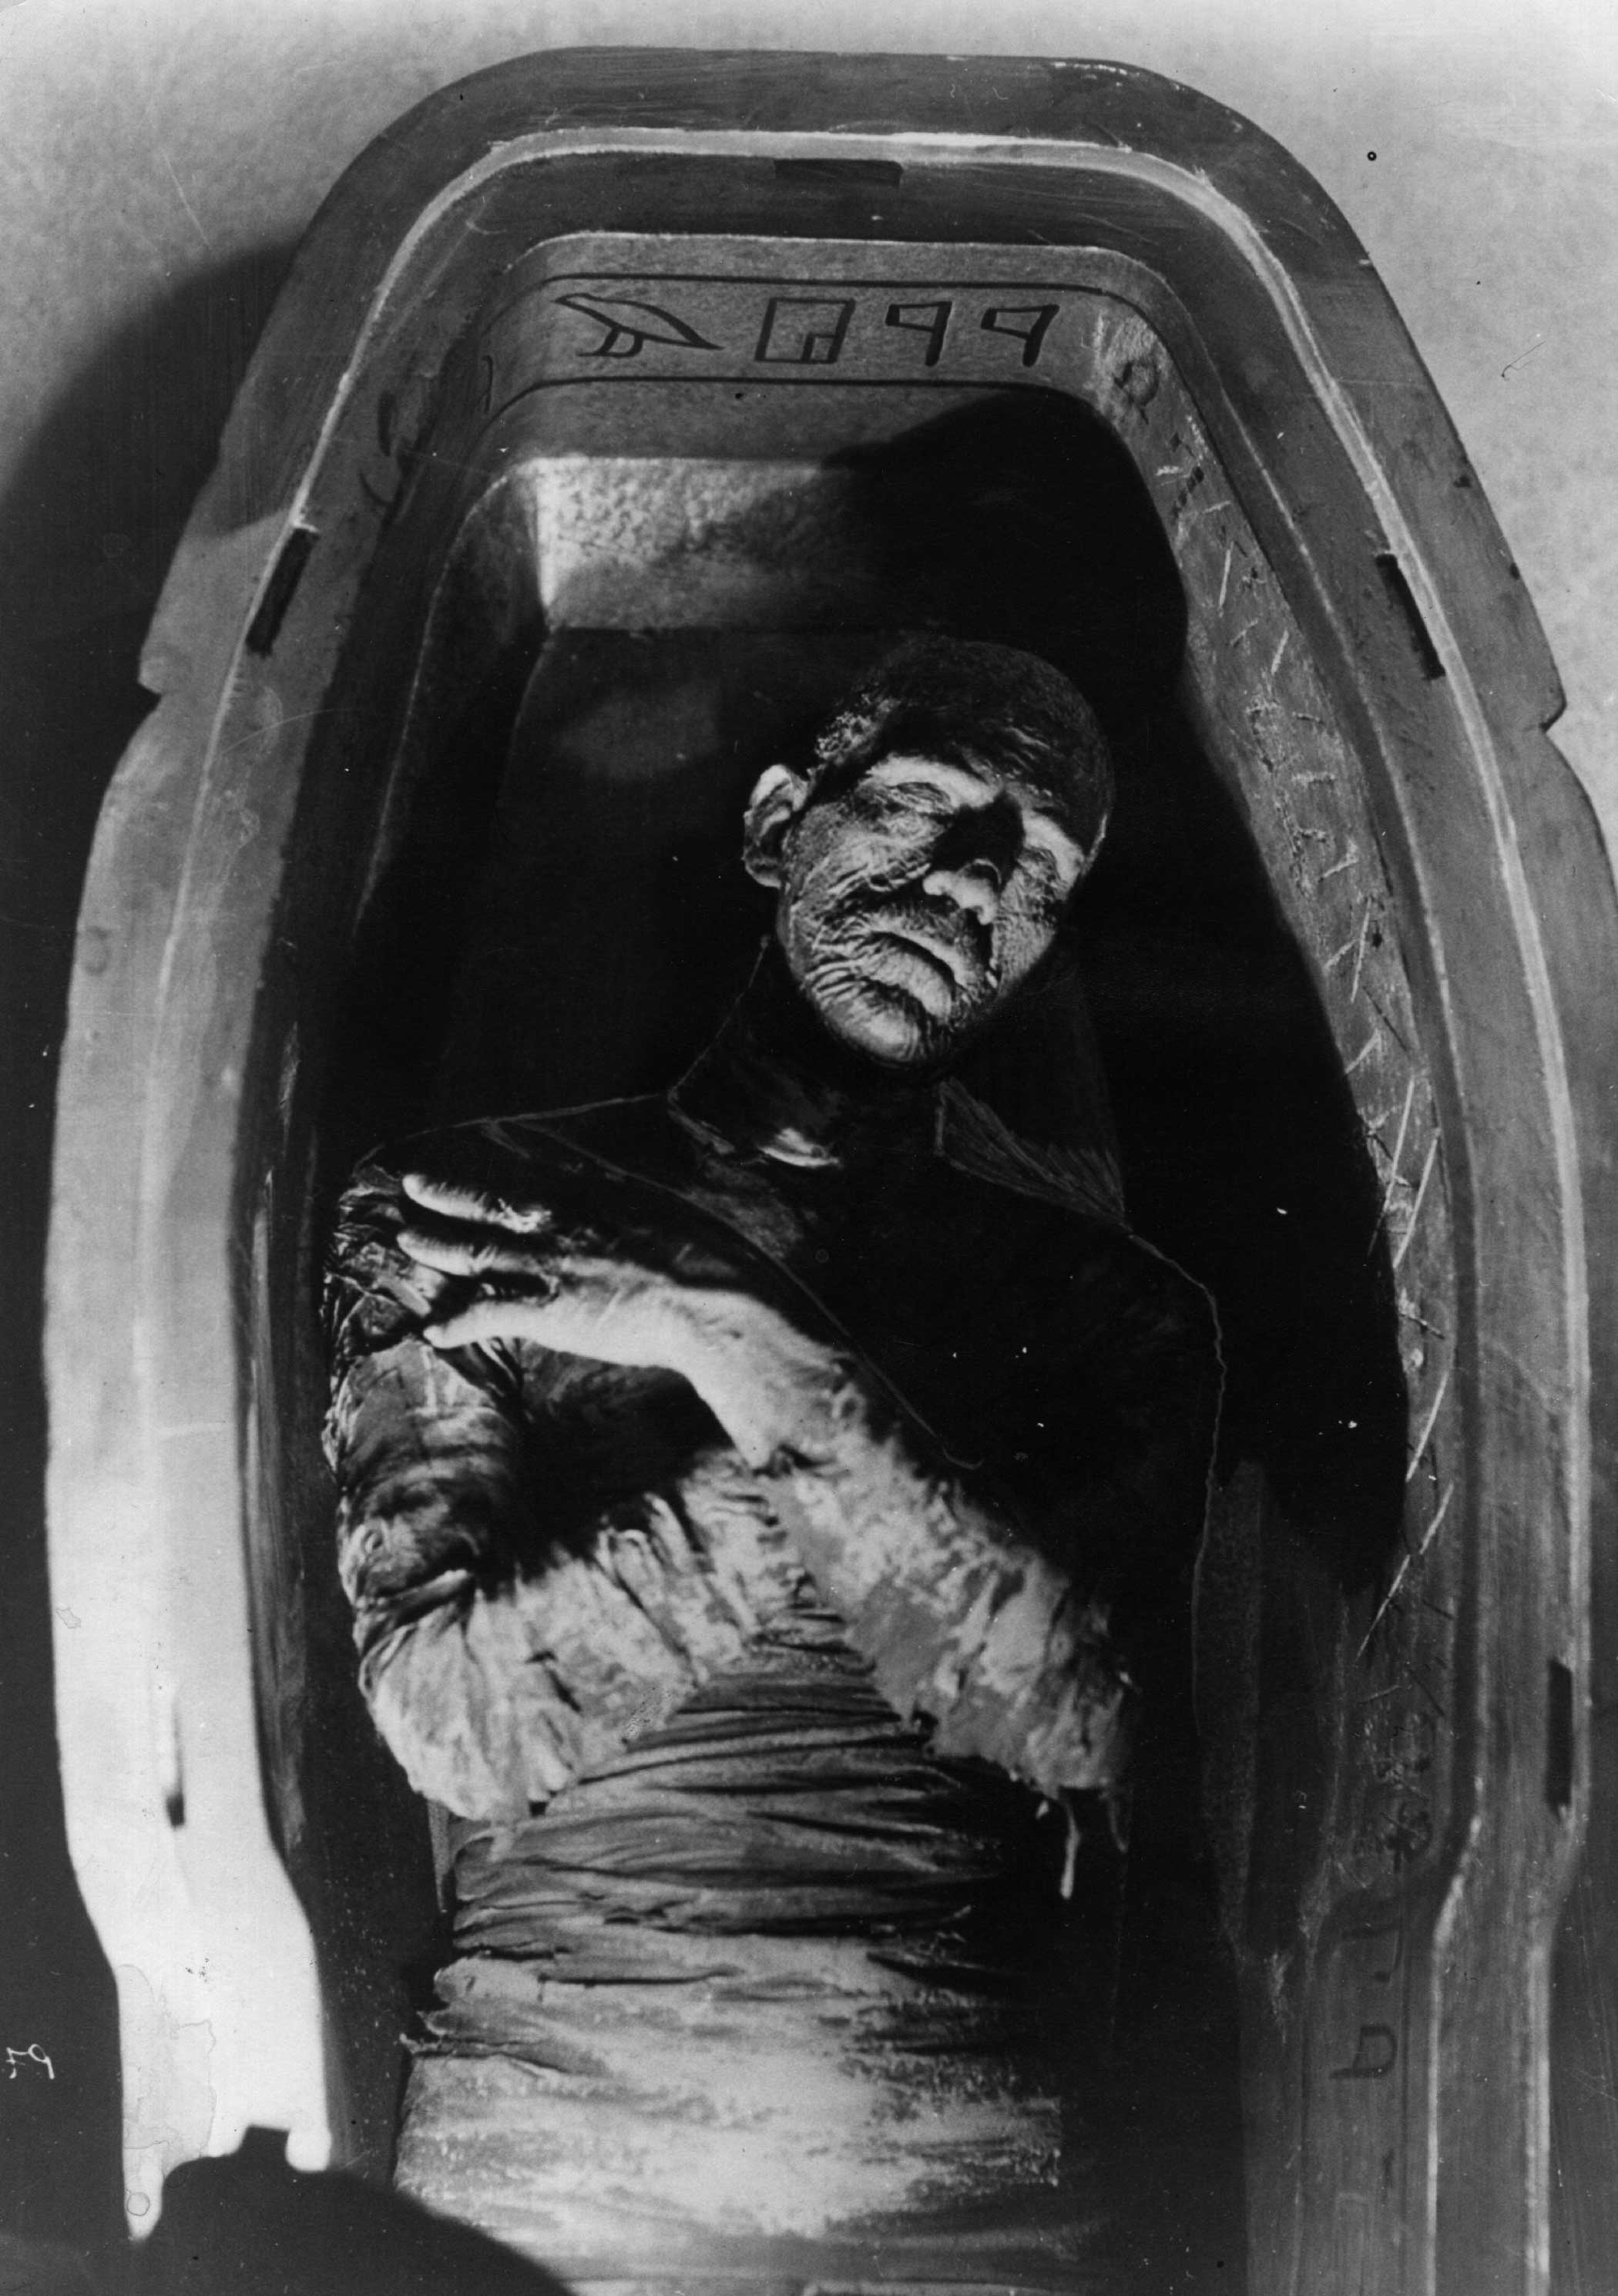 Imhotep from The Mummy, 1932.